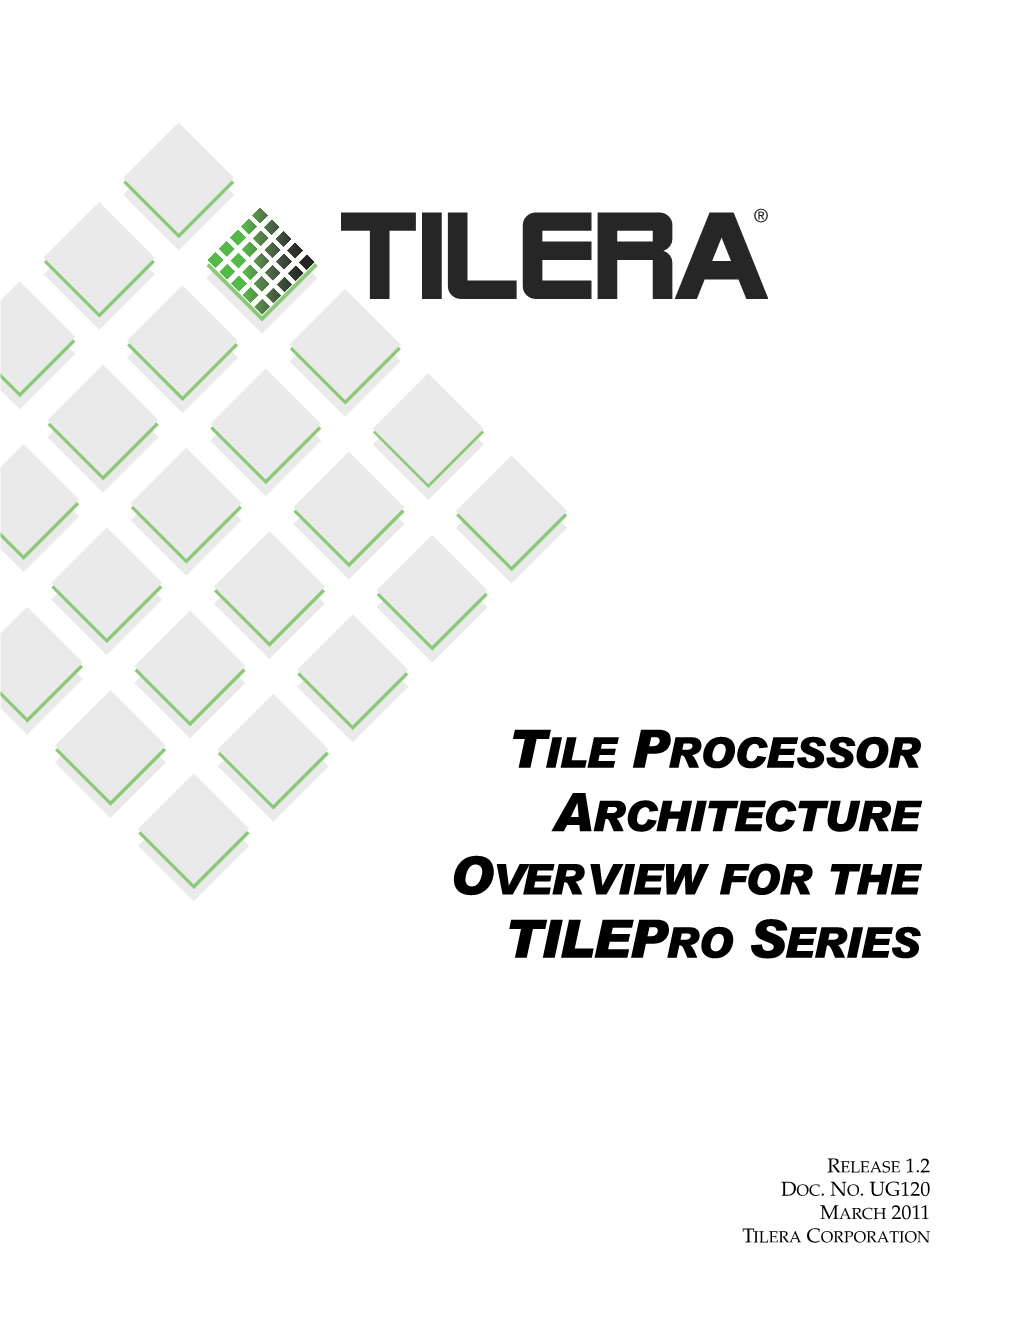 Tile Processor Architecture Overview for the Tilepro Series